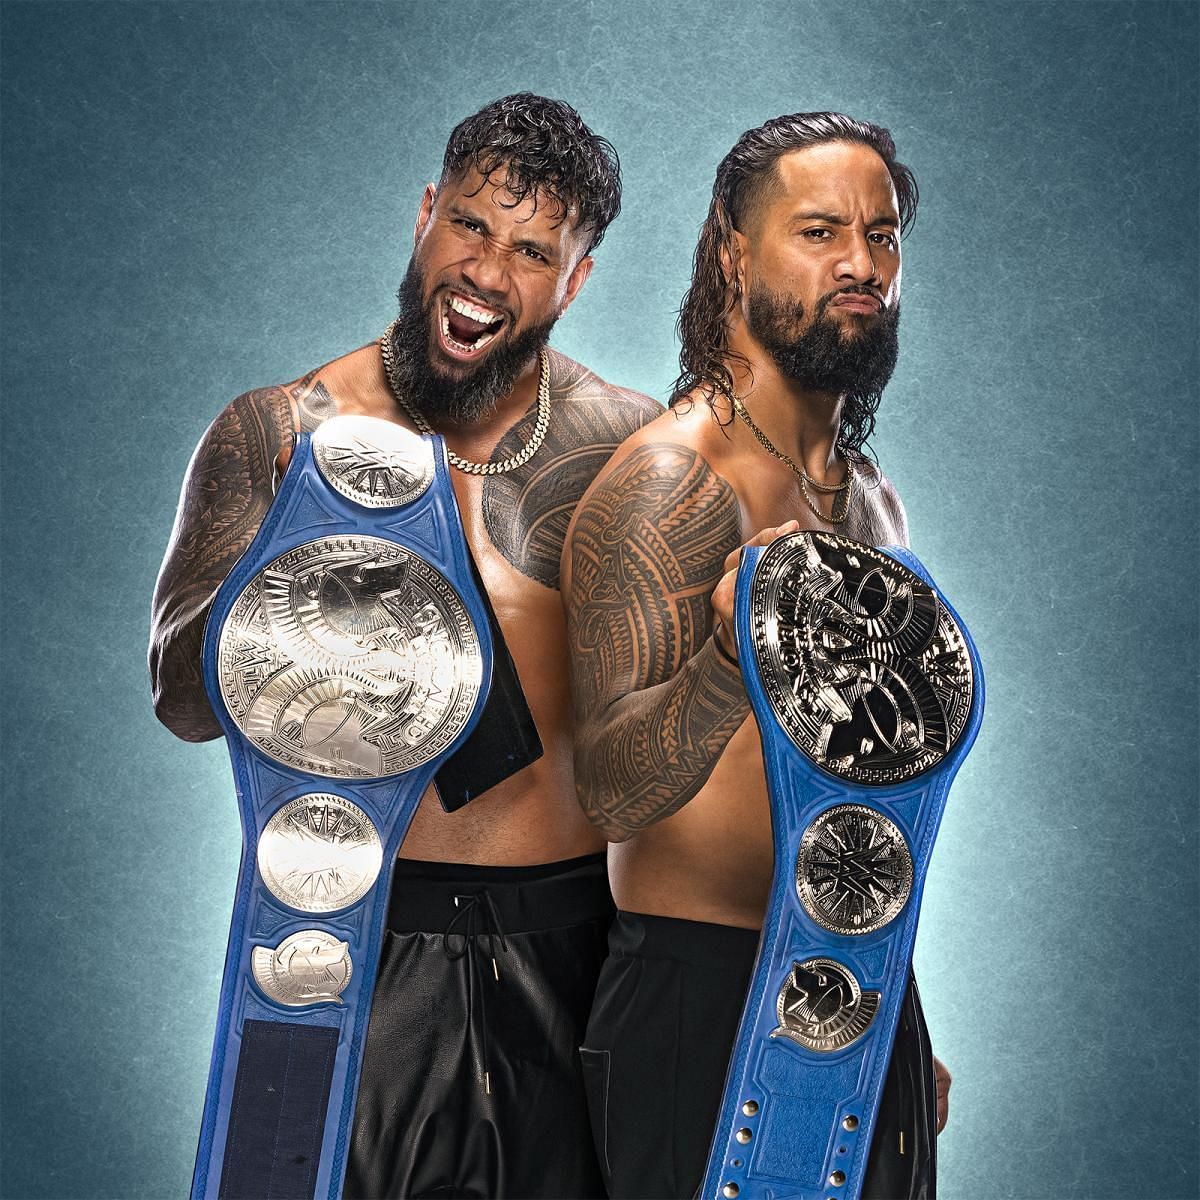 The current champions, The Usos, are on their fifth reign